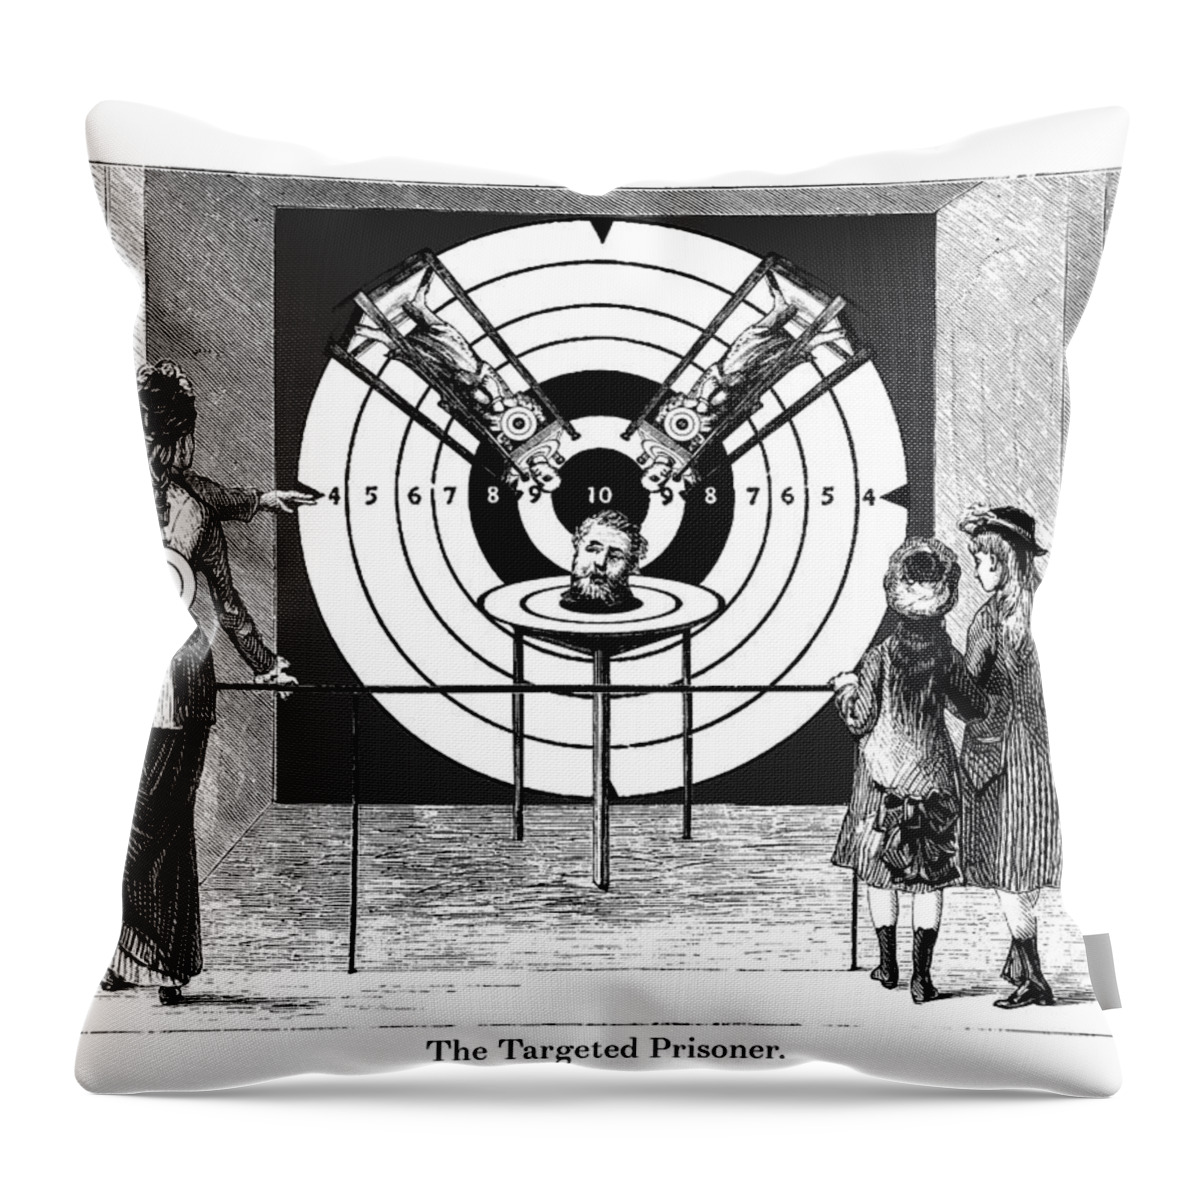 Digital Collage Throw Pillow featuring the digital art Targeted Prisoner by Eric Edelman